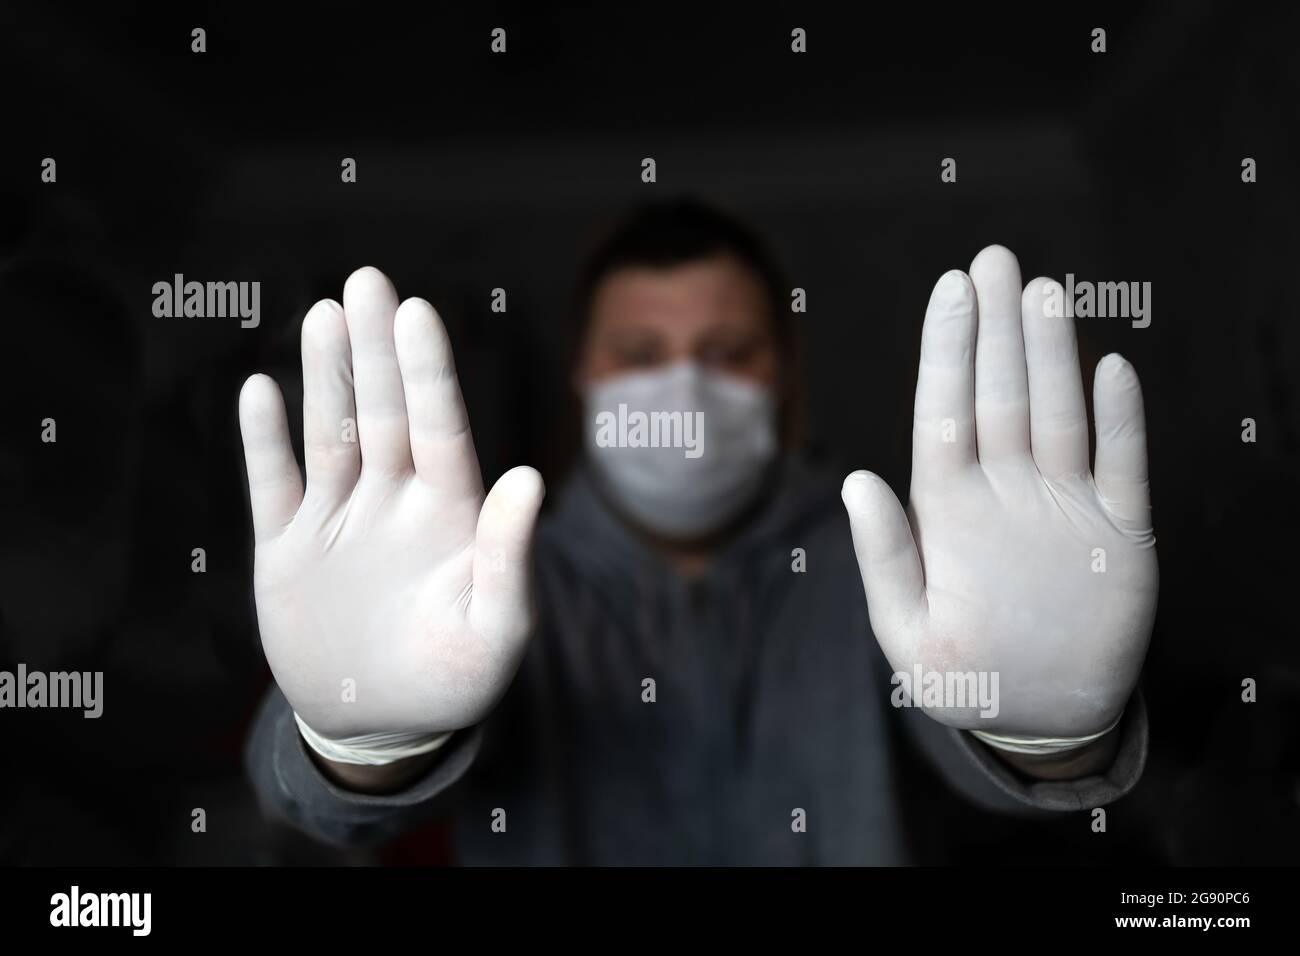 A man in a medical mask and gloves shows STOP with two hands, on a dark background. Coronavirus infection protection concept. COVID-19. Stock Photo